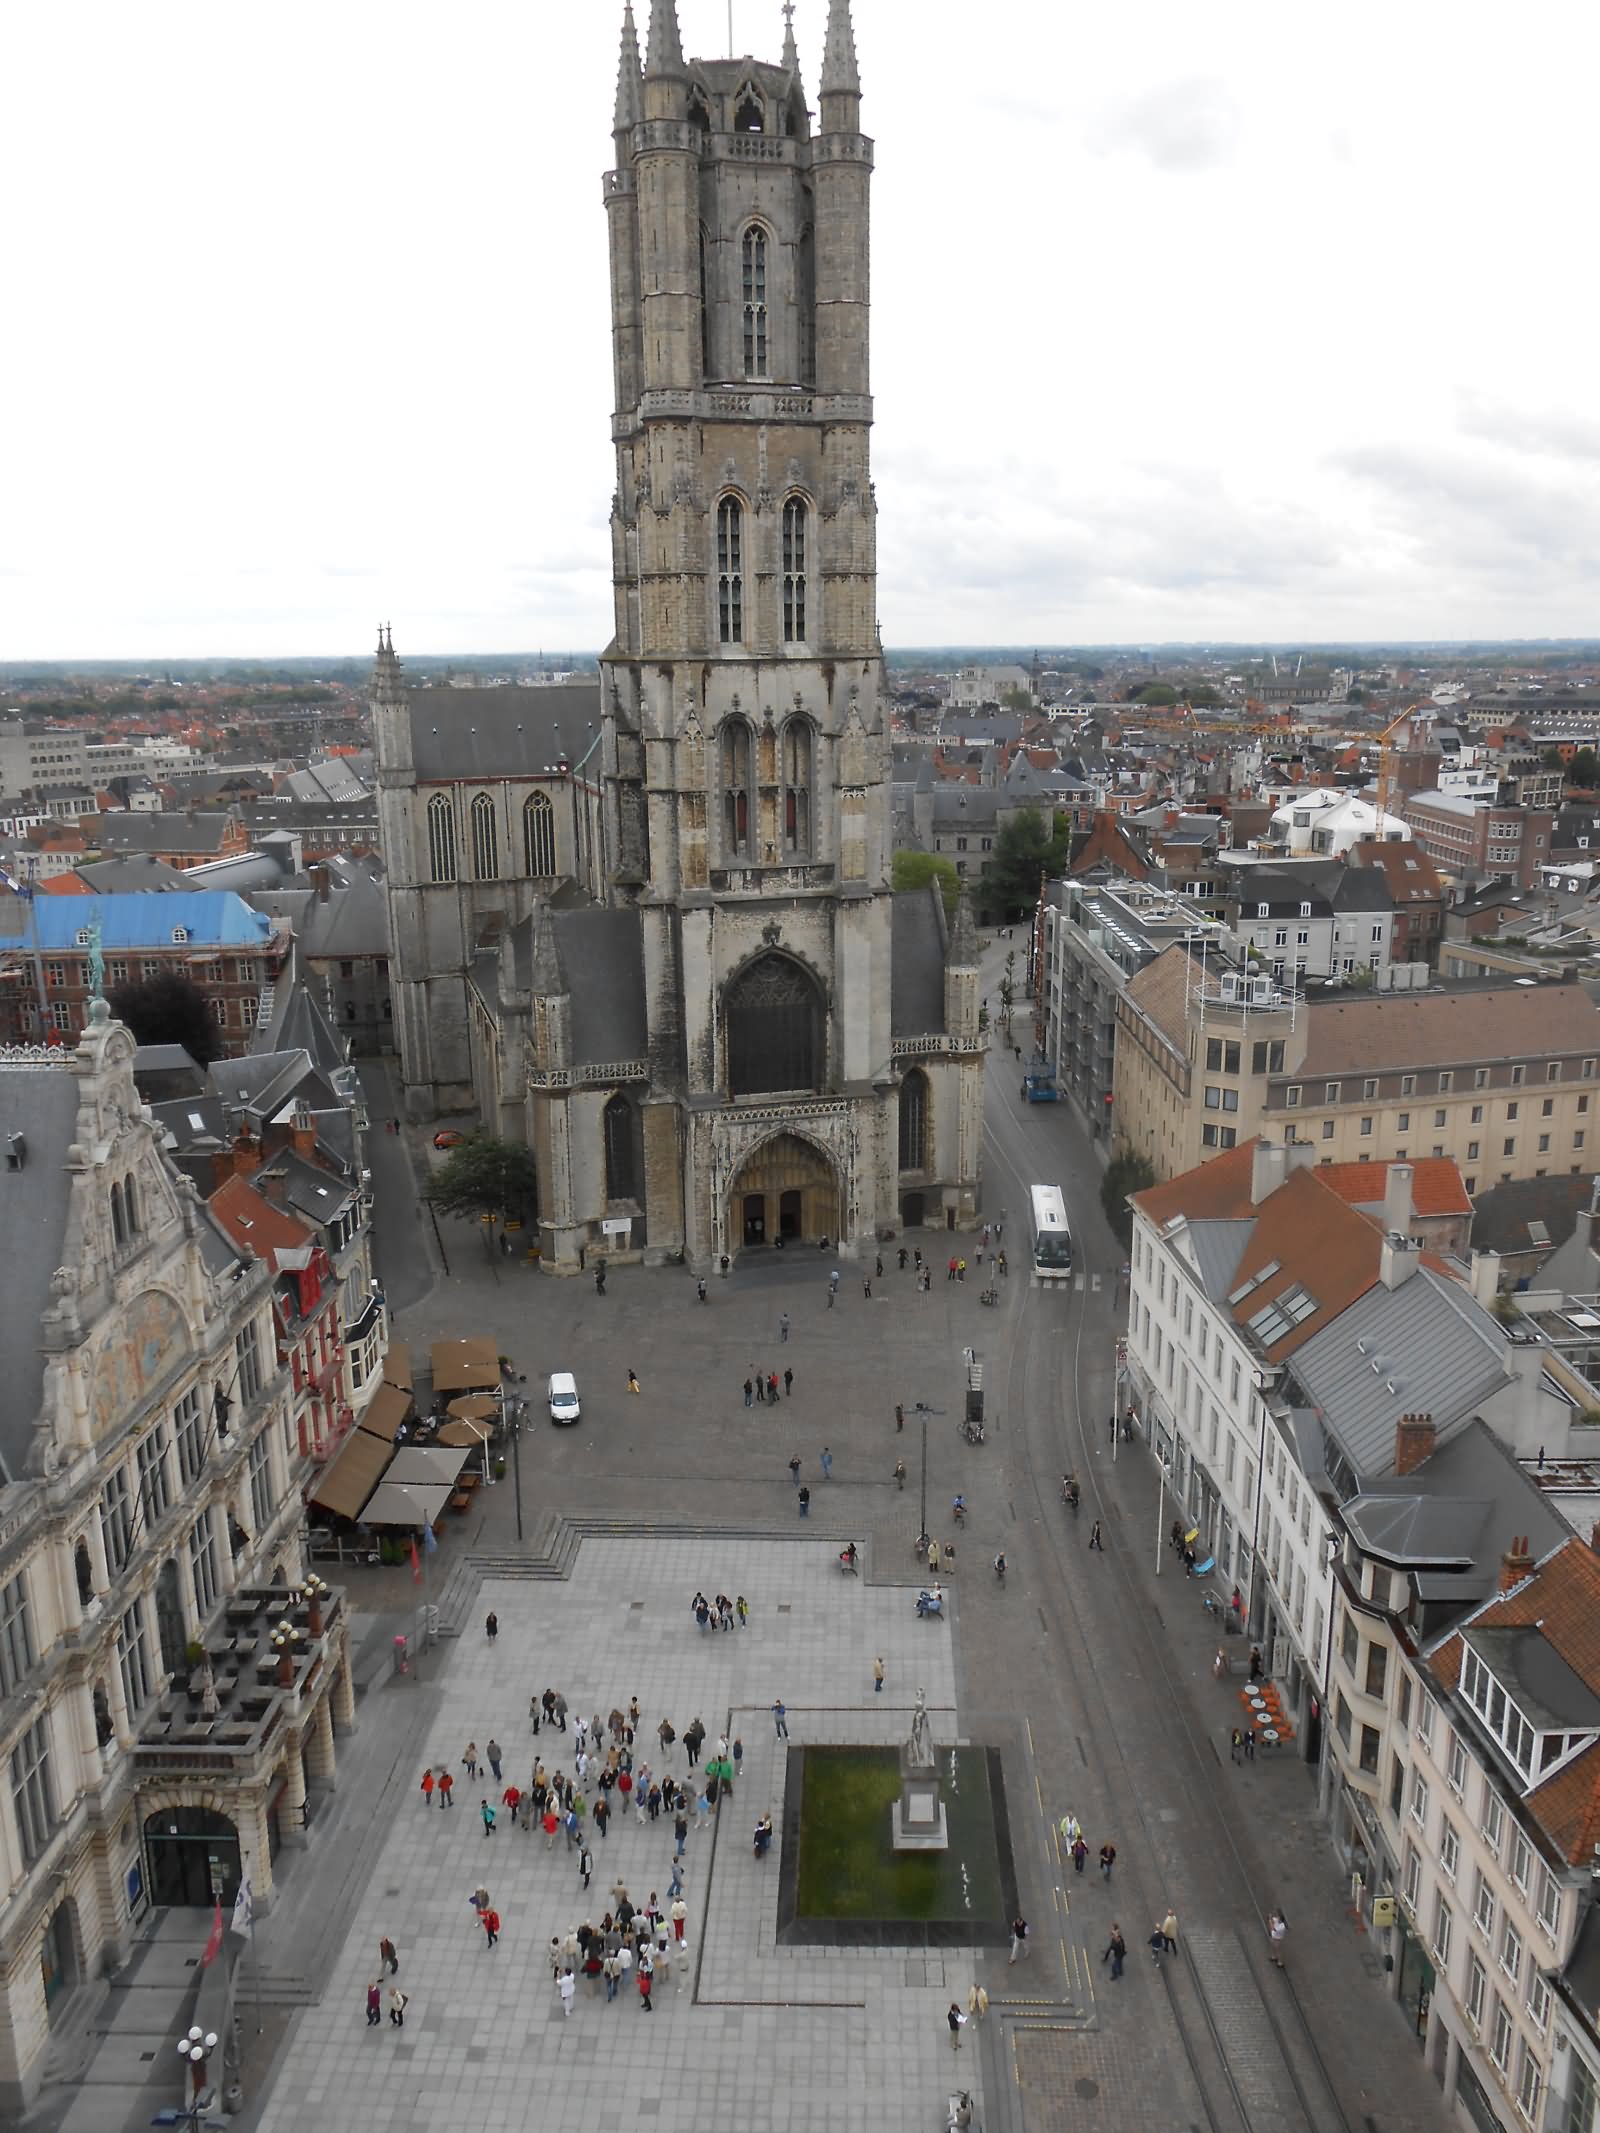 St. Bathos Cathedral From The Belfry of Ghent In Belgium